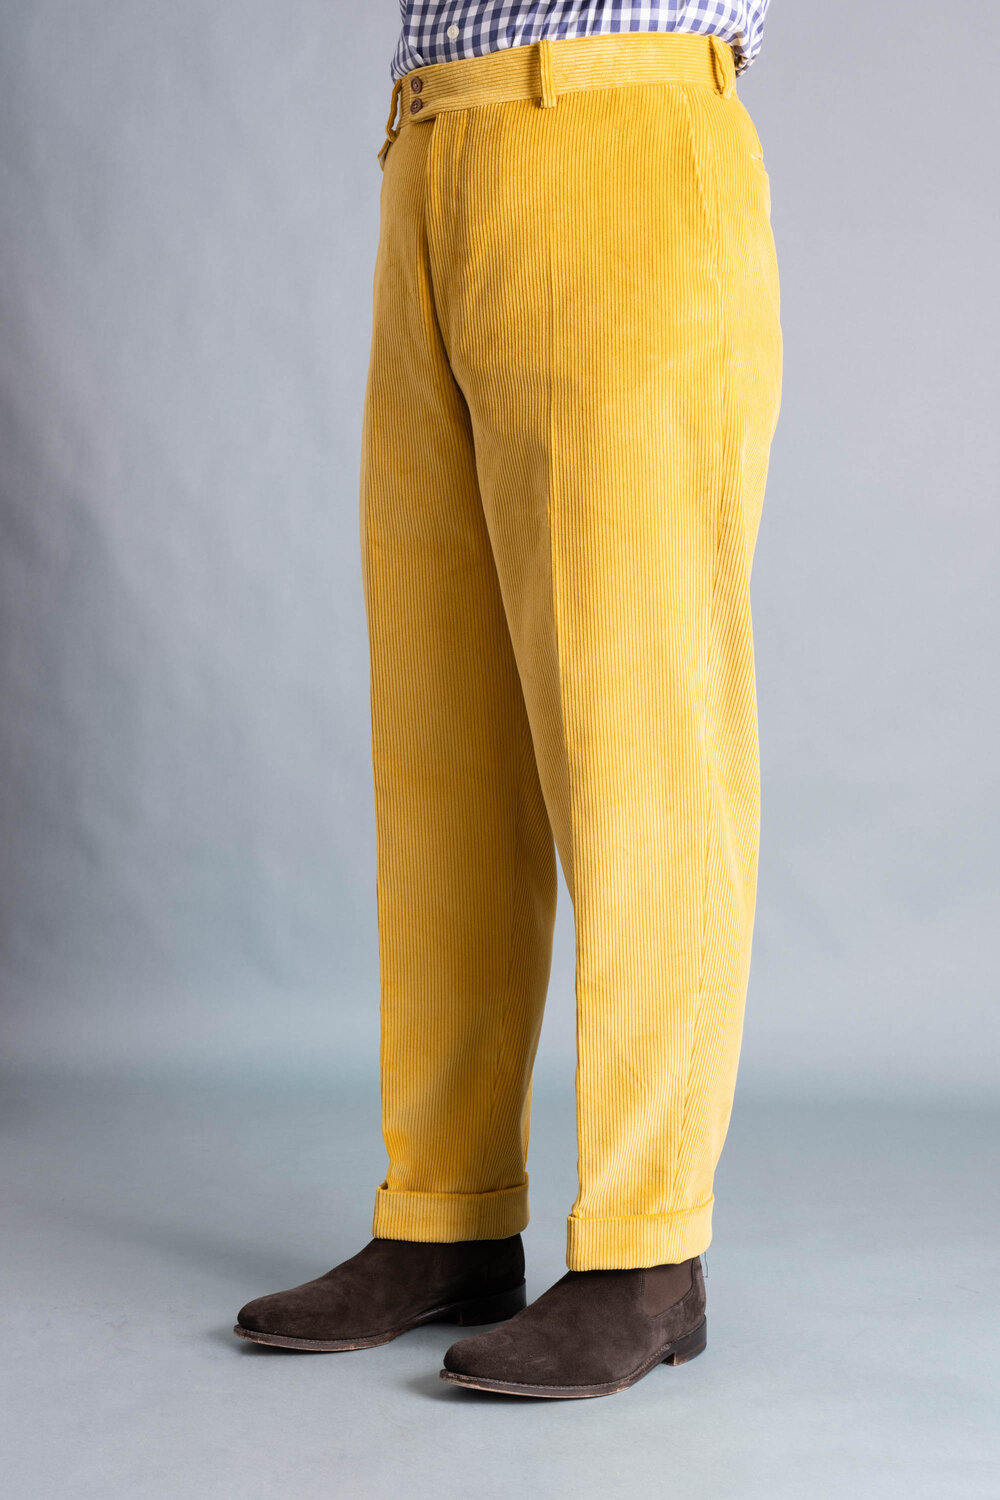 Goldenrod Yellow Corduroy Trousers   Stancliffe Flat Front in 8